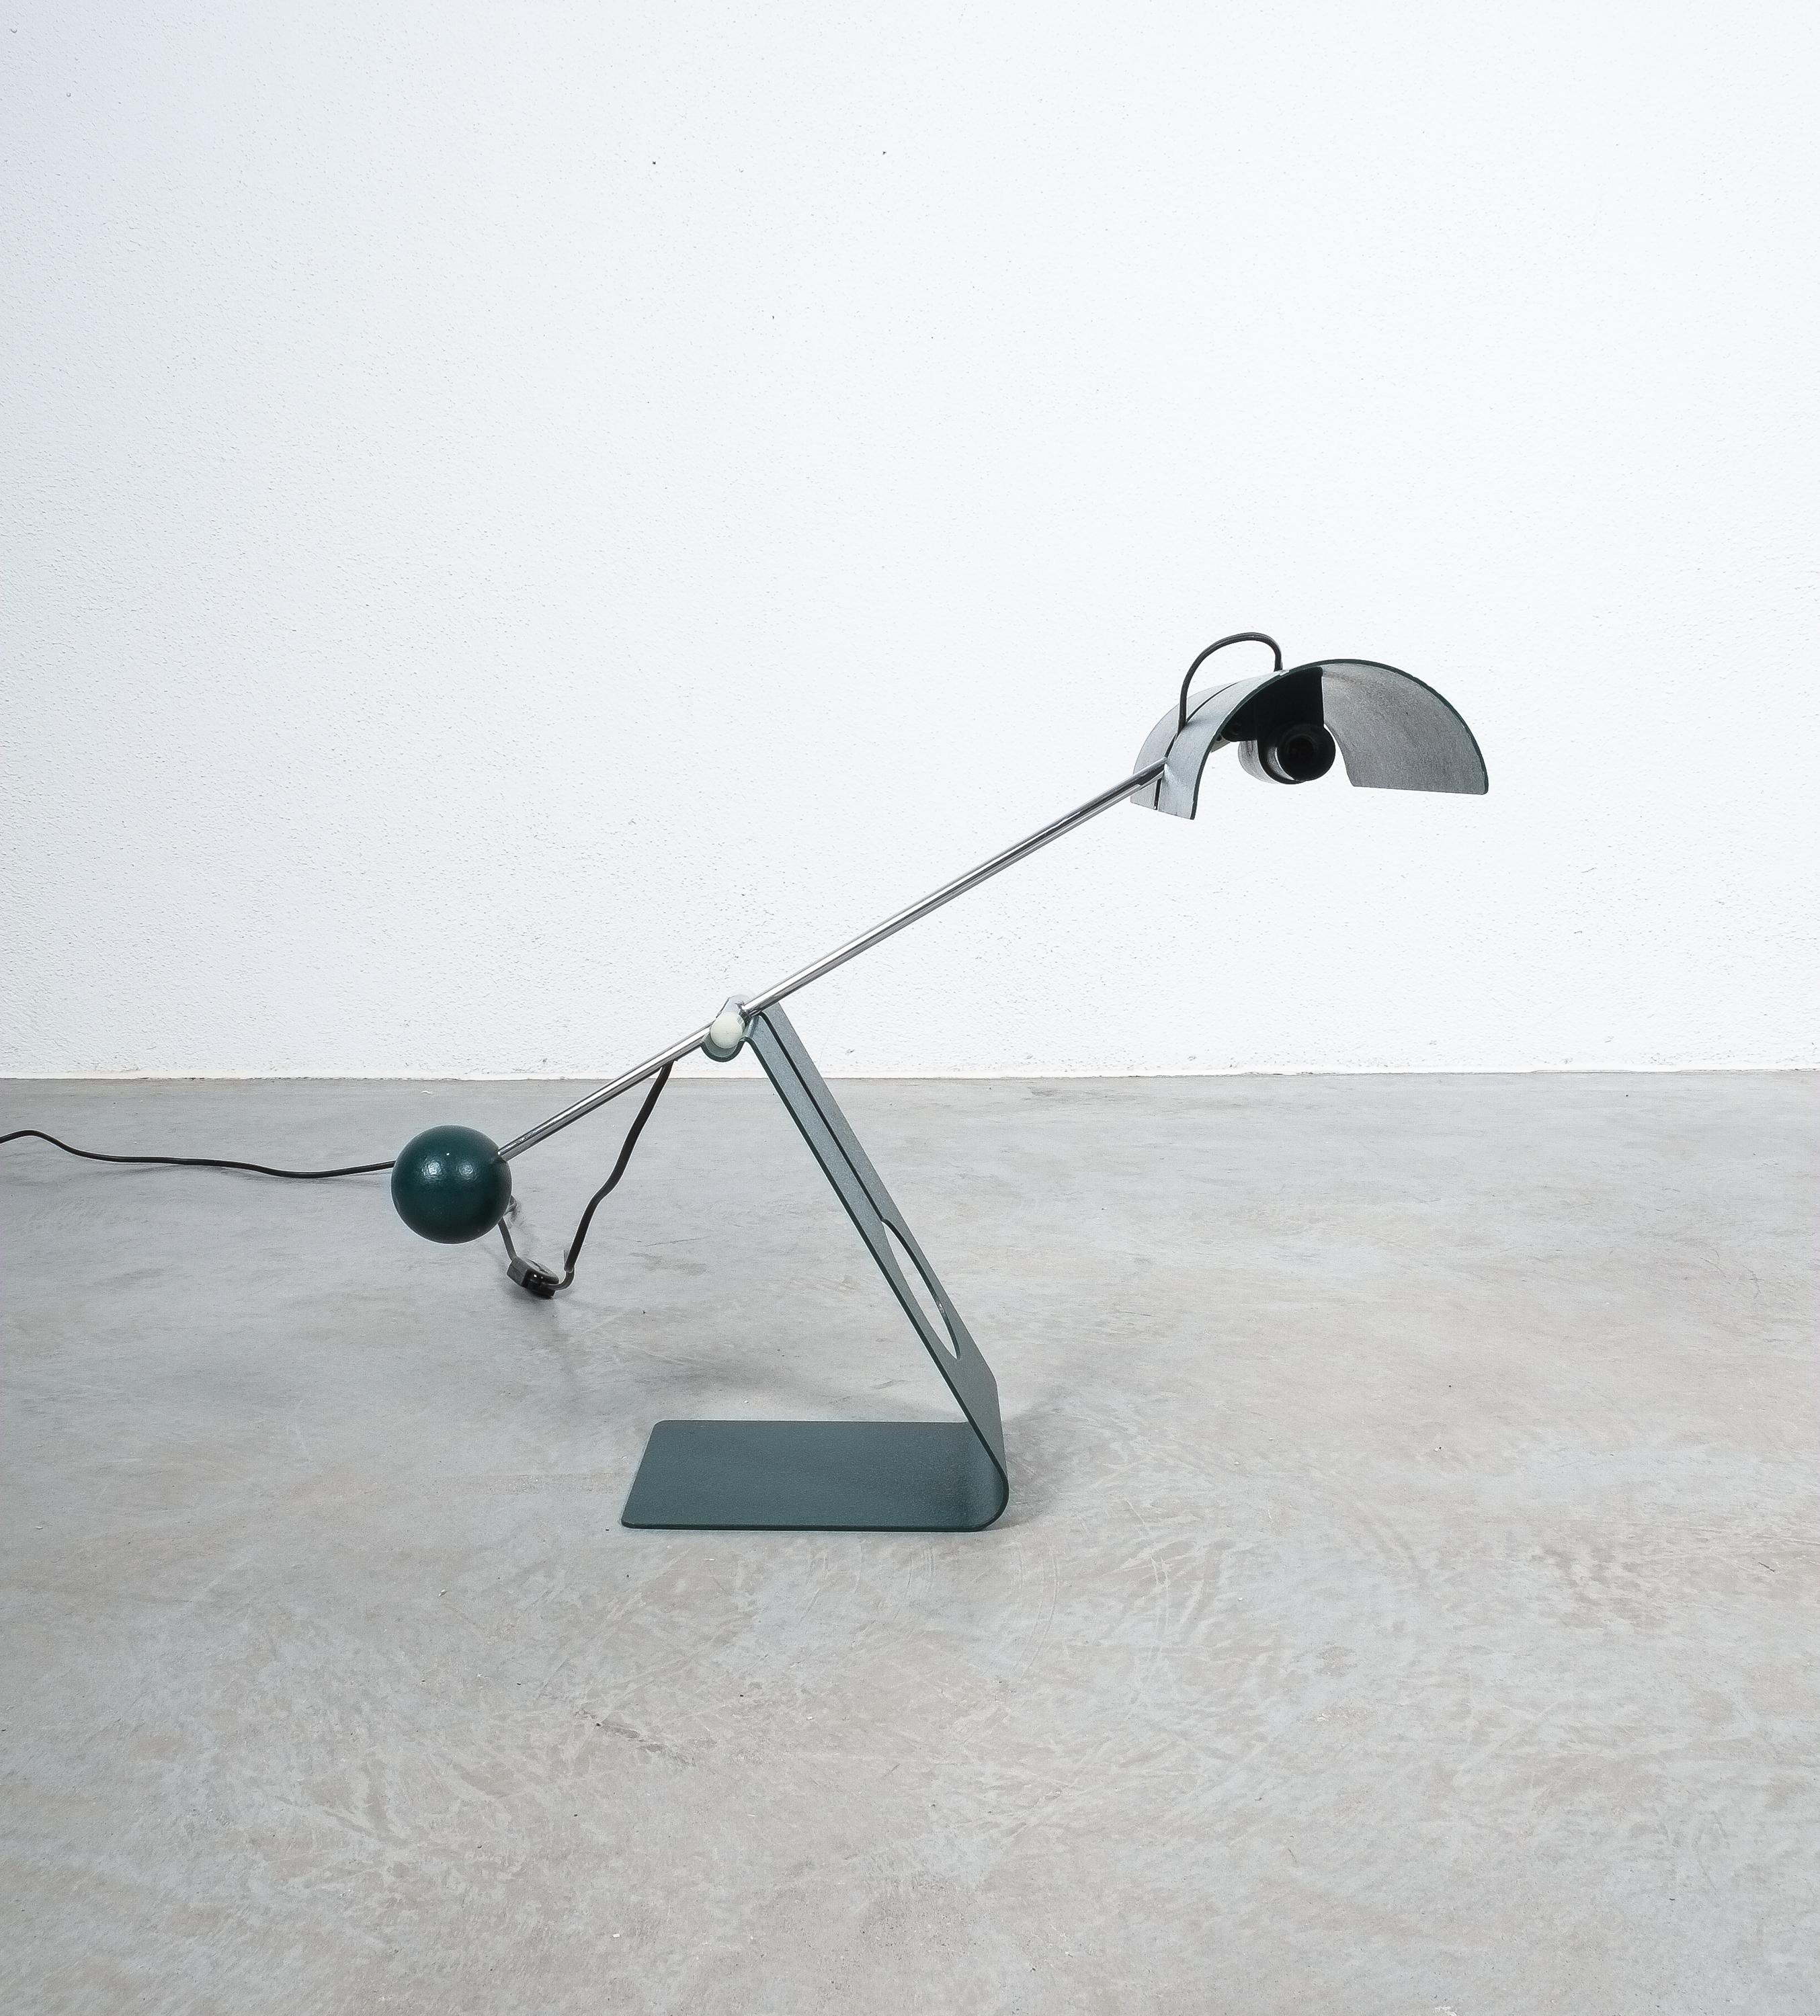 Painted Mauro Martini Adjustable Counterweight Table Lamp Picchio, Italy, circa 1965